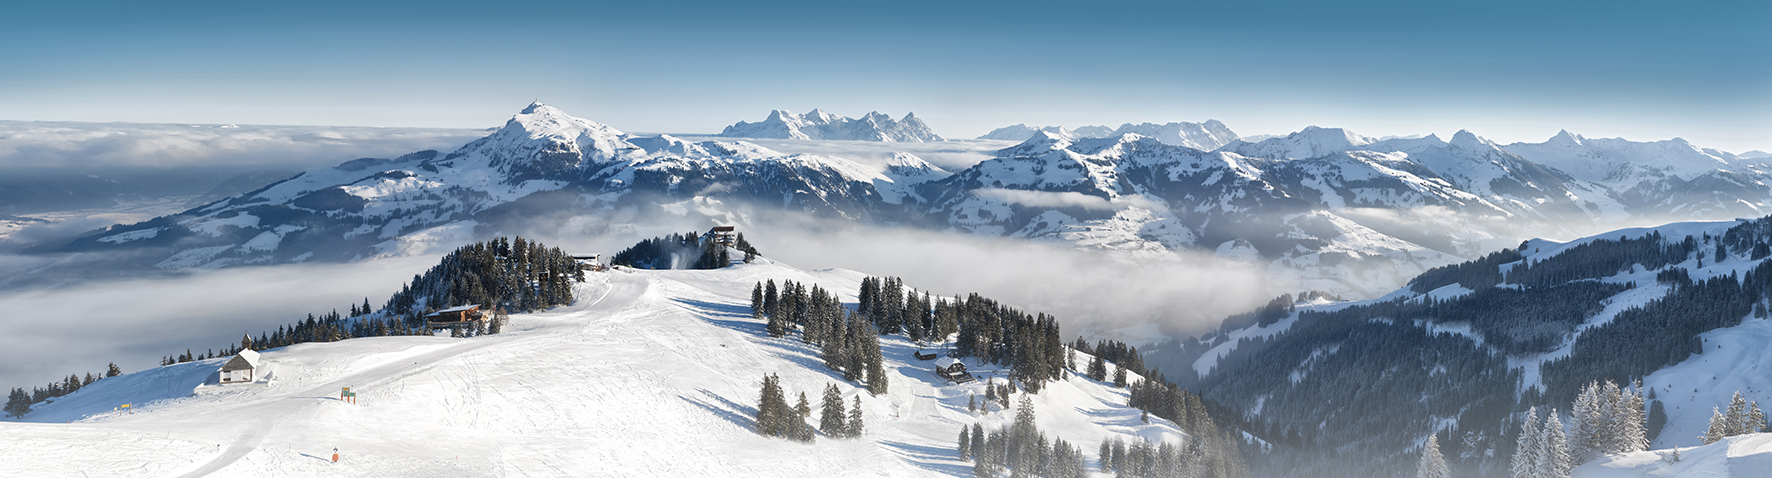 Domus Vivendi with new location in Kitzbühel at the turn of the year